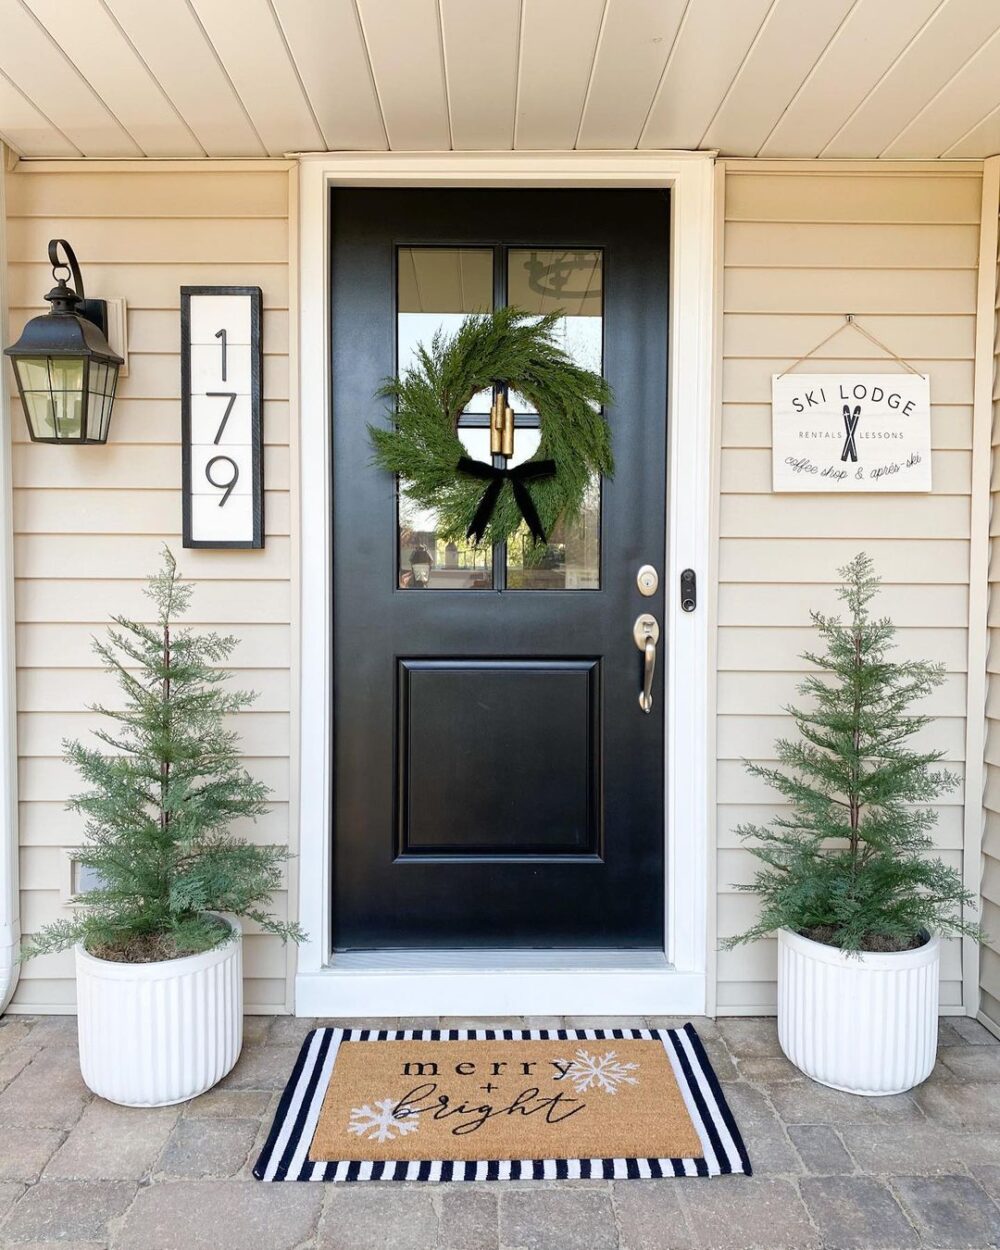 100+ Magical Outdoor Christmas Decorations Ideas